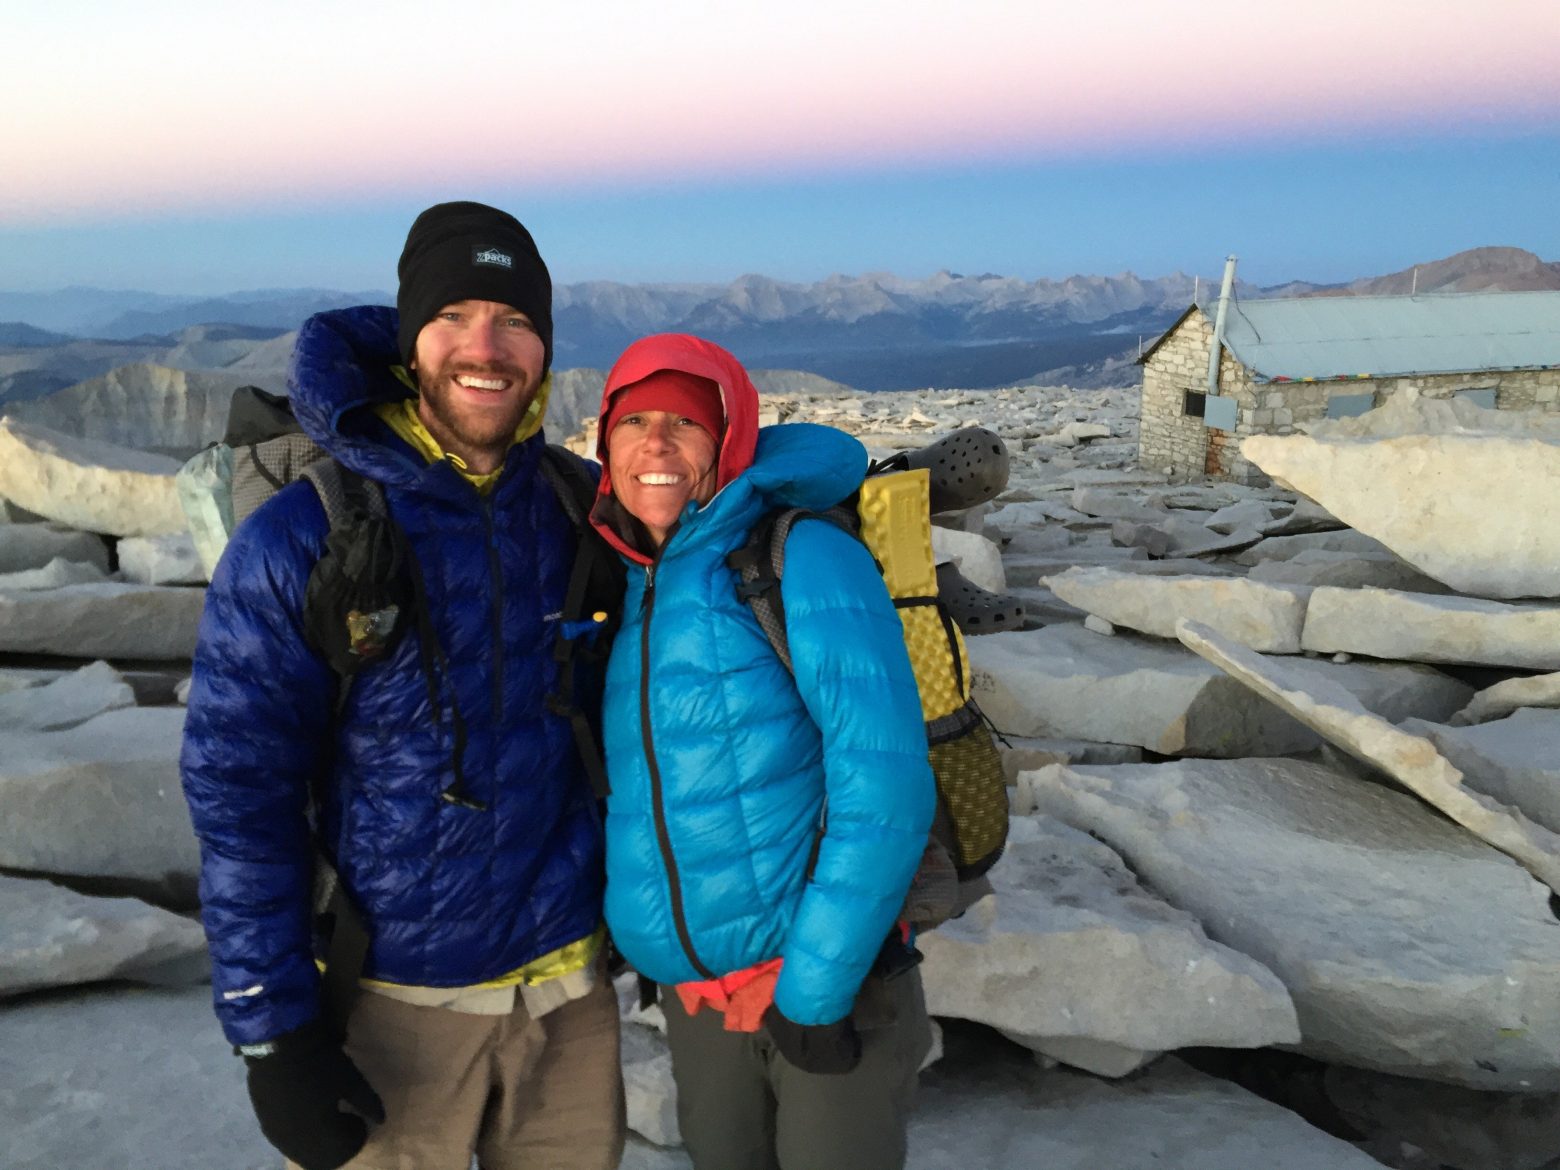 Ace and Mountain Man on the summit of Mt. Whitney